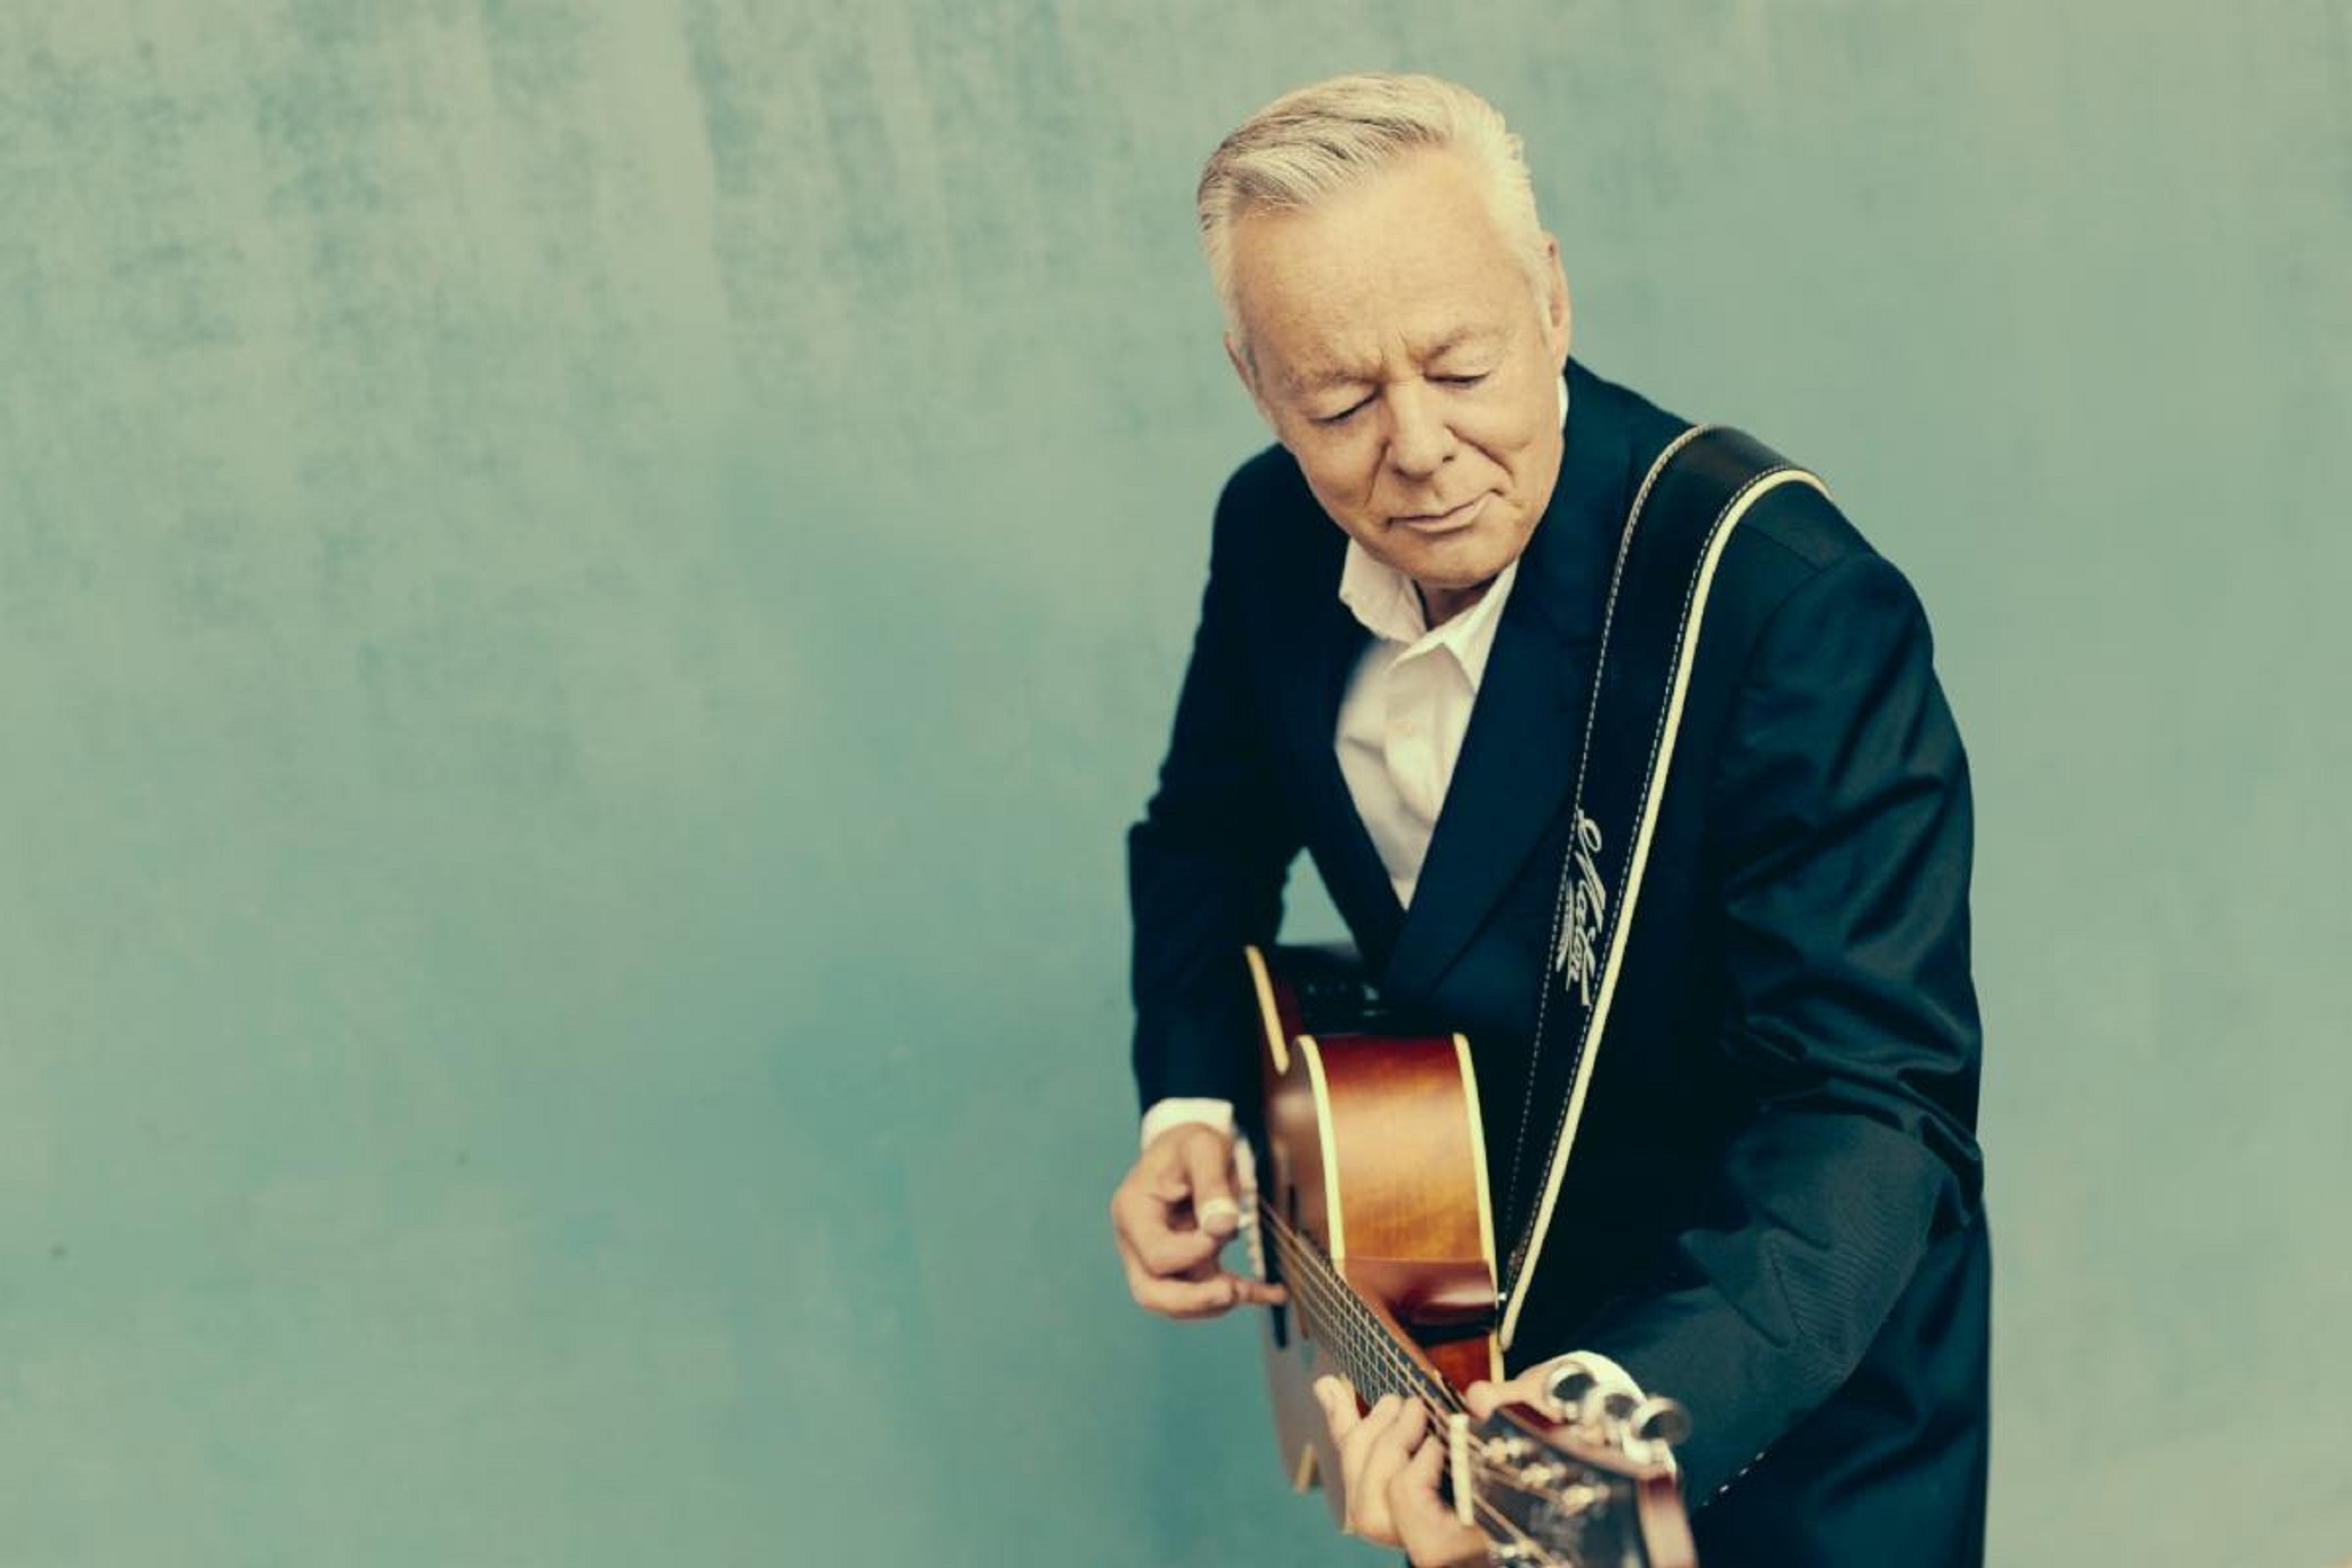 TOMMY EMMANUEL Joins Forces With Little Feat And Sam Bush For Exhilarating Cover Of “Cajun Girl”